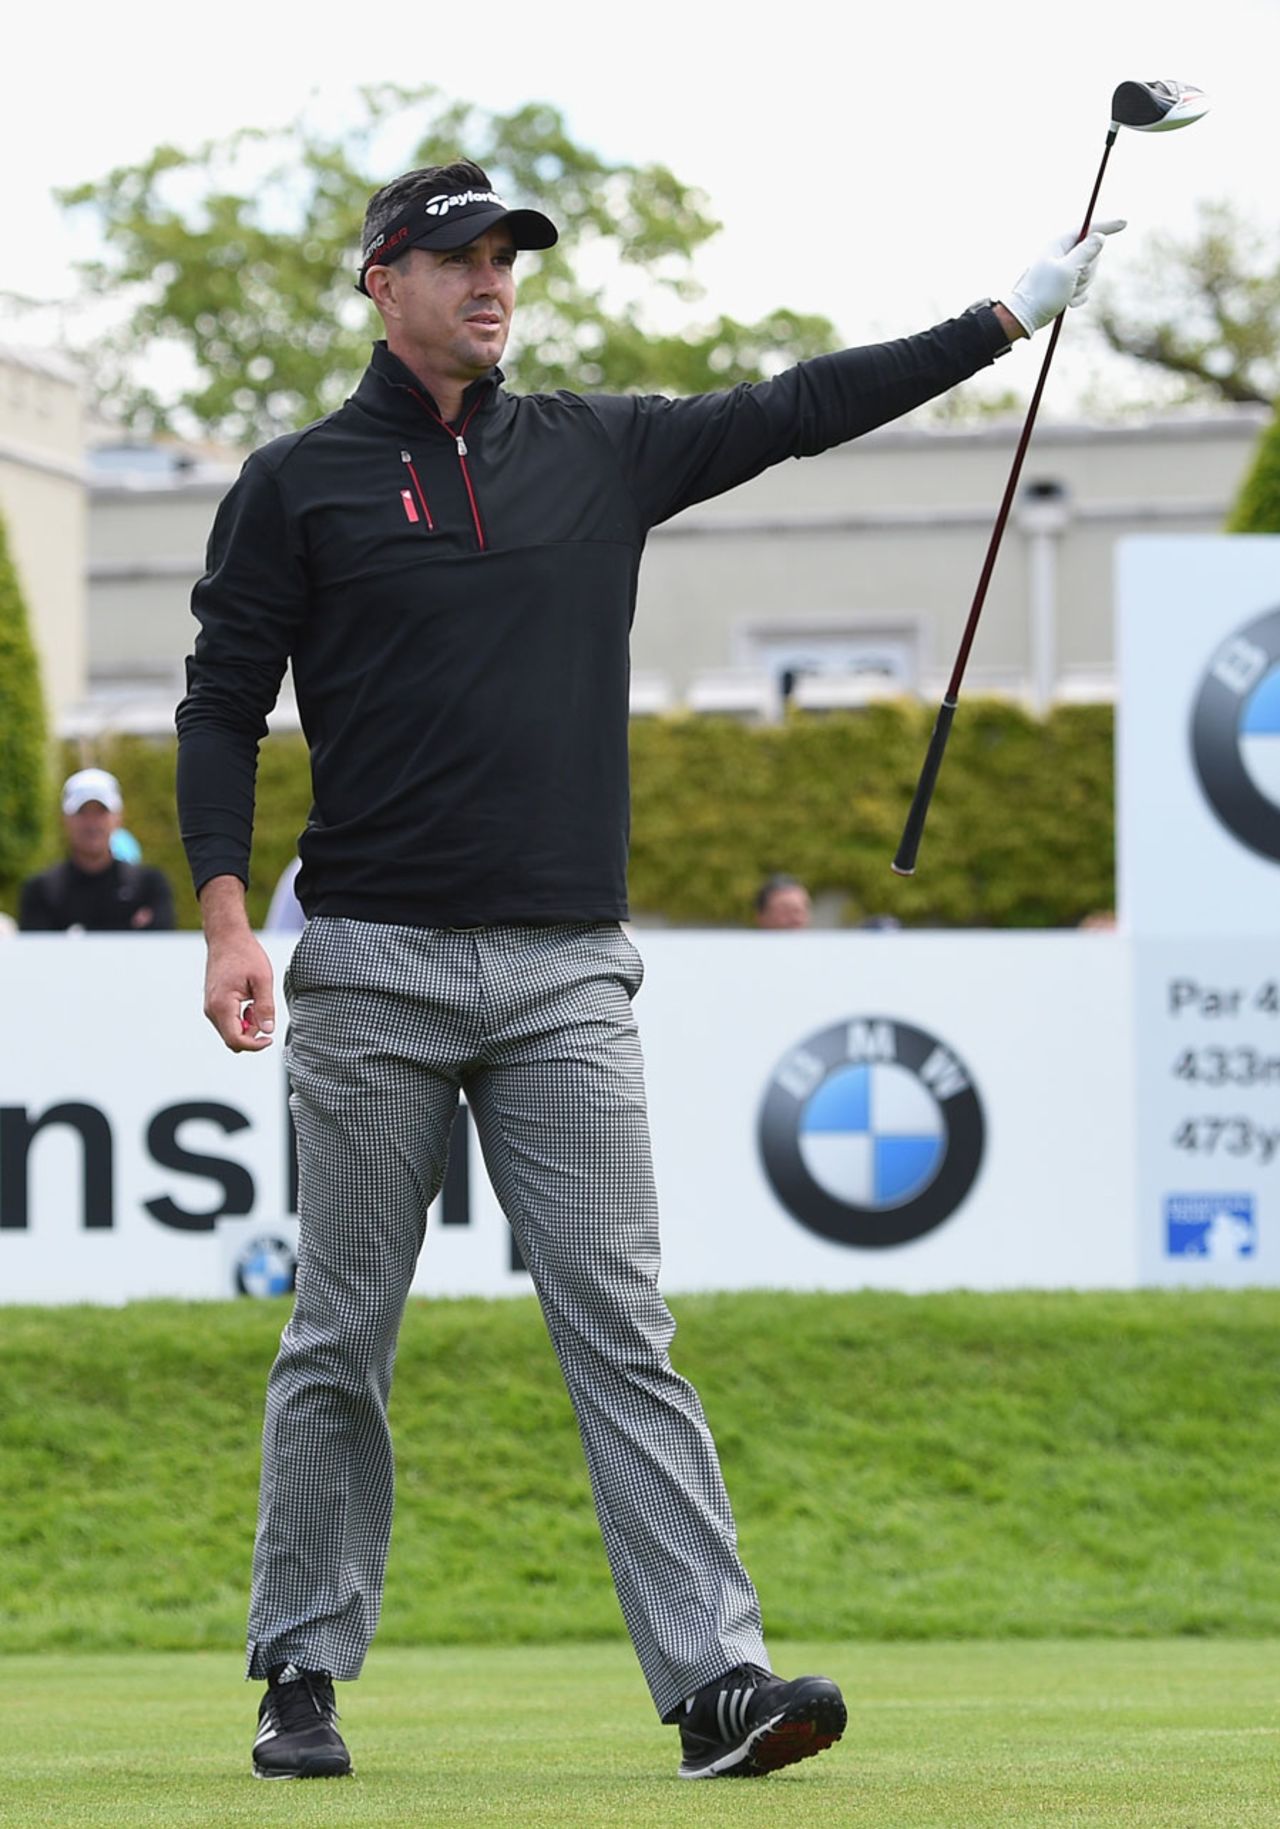 Kevin Pietersen takes part in a pro-am golf event, Wentworth, May 20, 2015